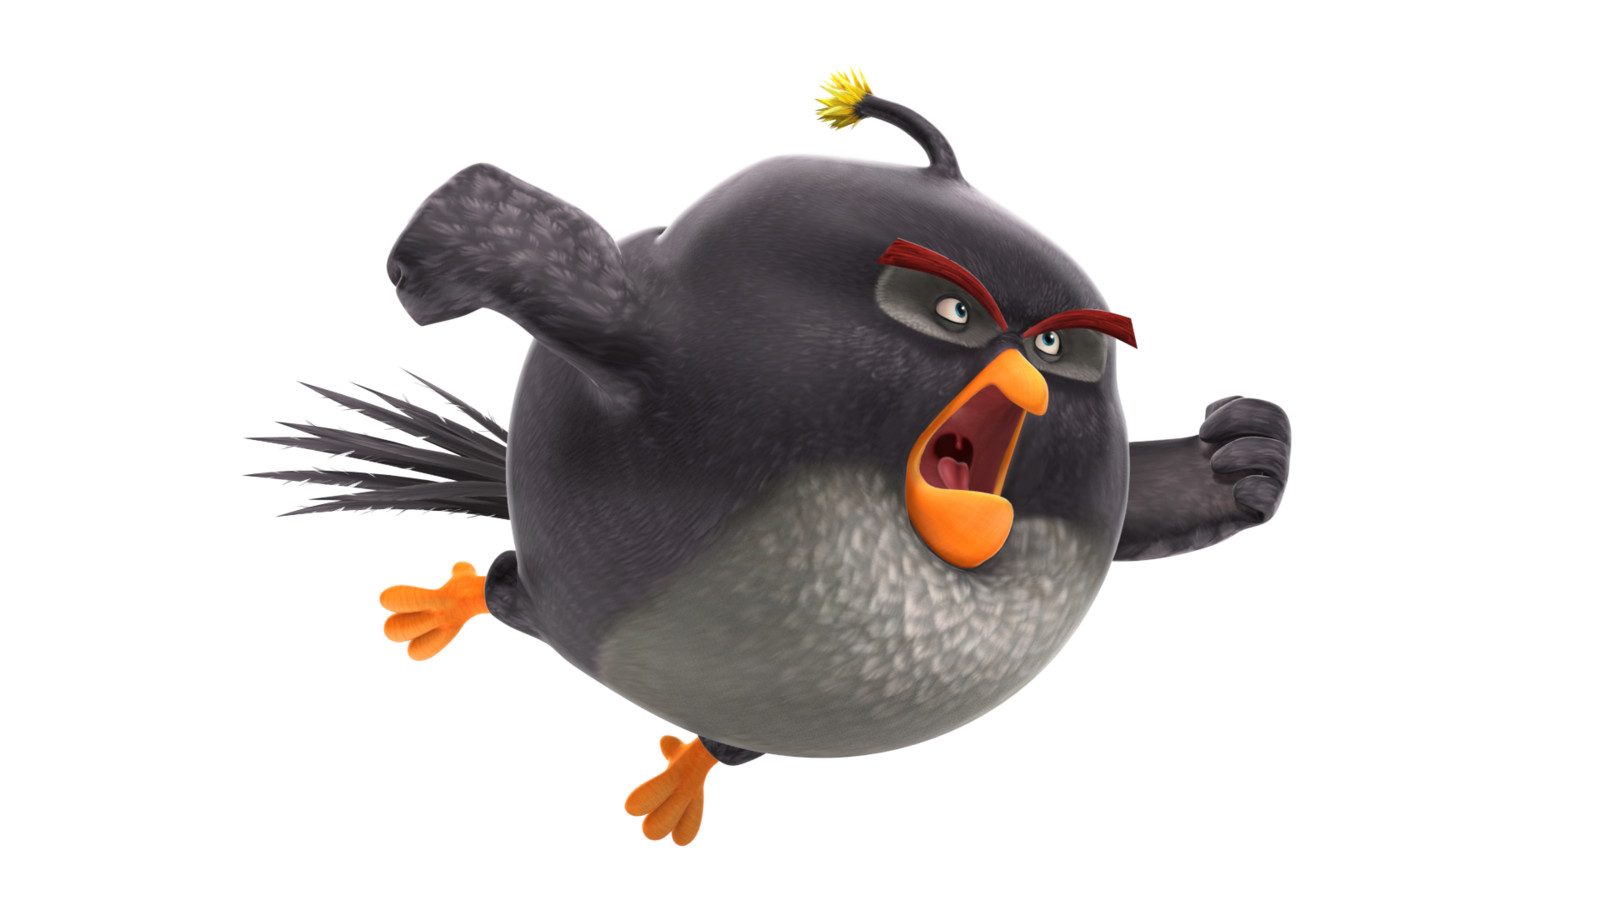 Promo Character Render. Angry Birds Action! Character texture, pose, lighting and render created by myself.